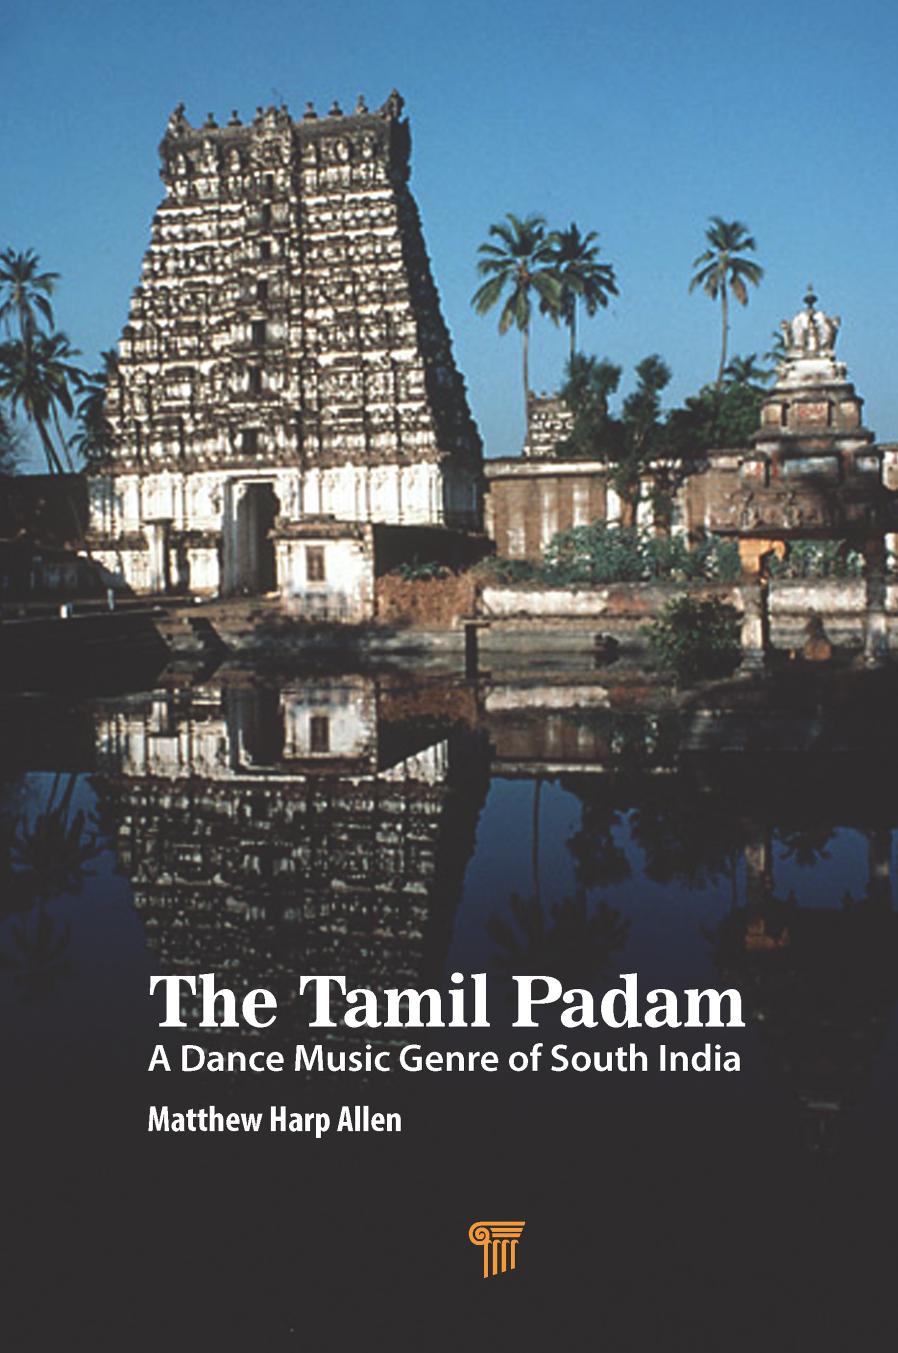 The Tamil Padam: A Dance Music Genre of South India by Matthew Harp Allen